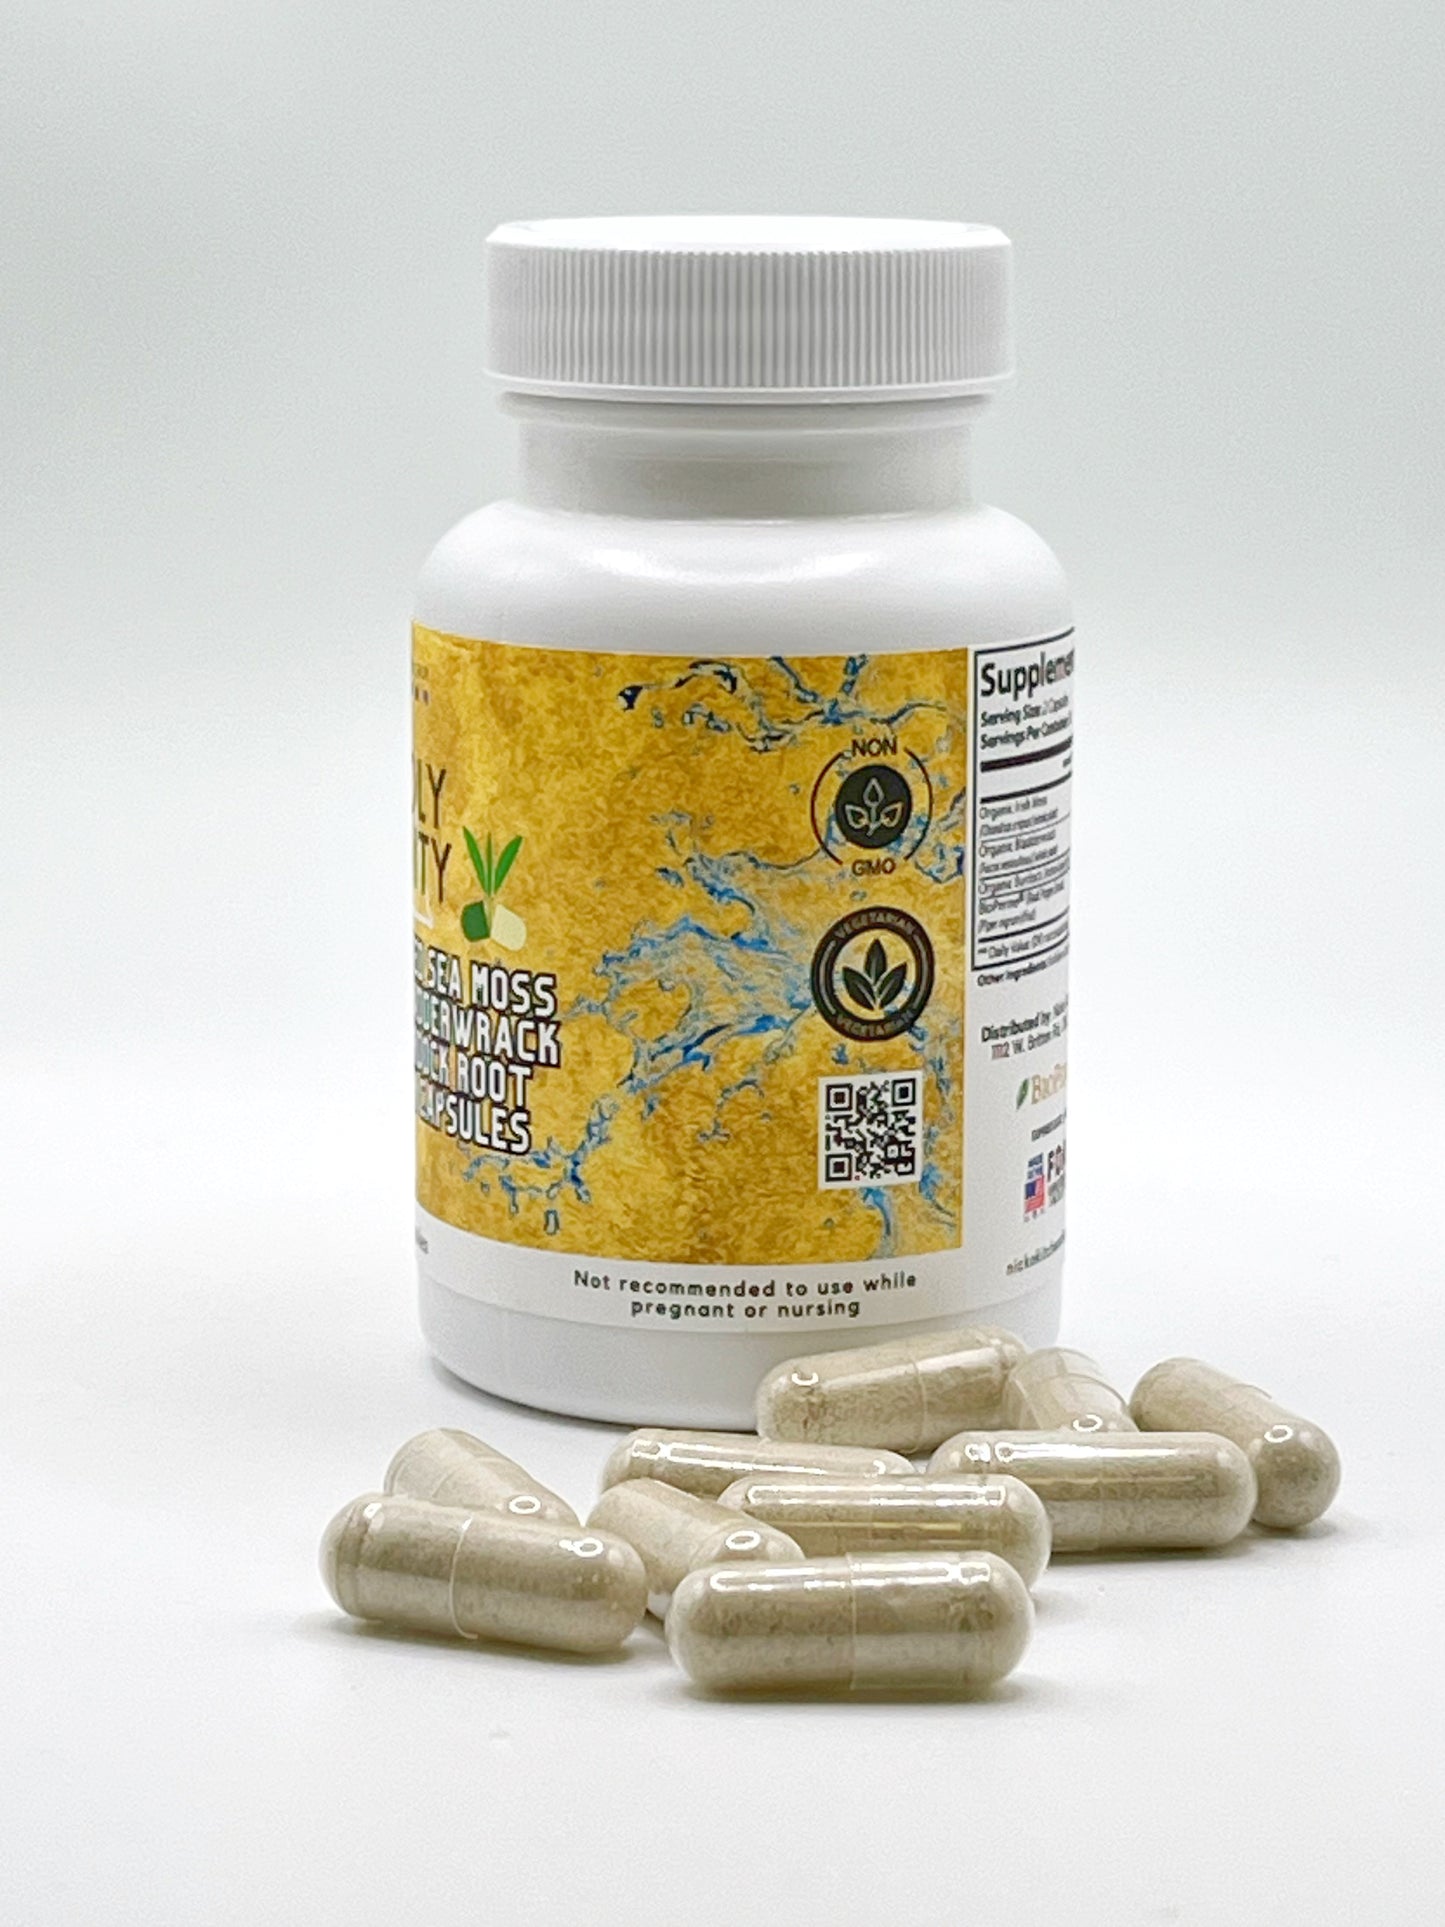 WholyTrinity Sea Moss Capsules | with Bladderwrack and Burdock Root | Recurring Subscription